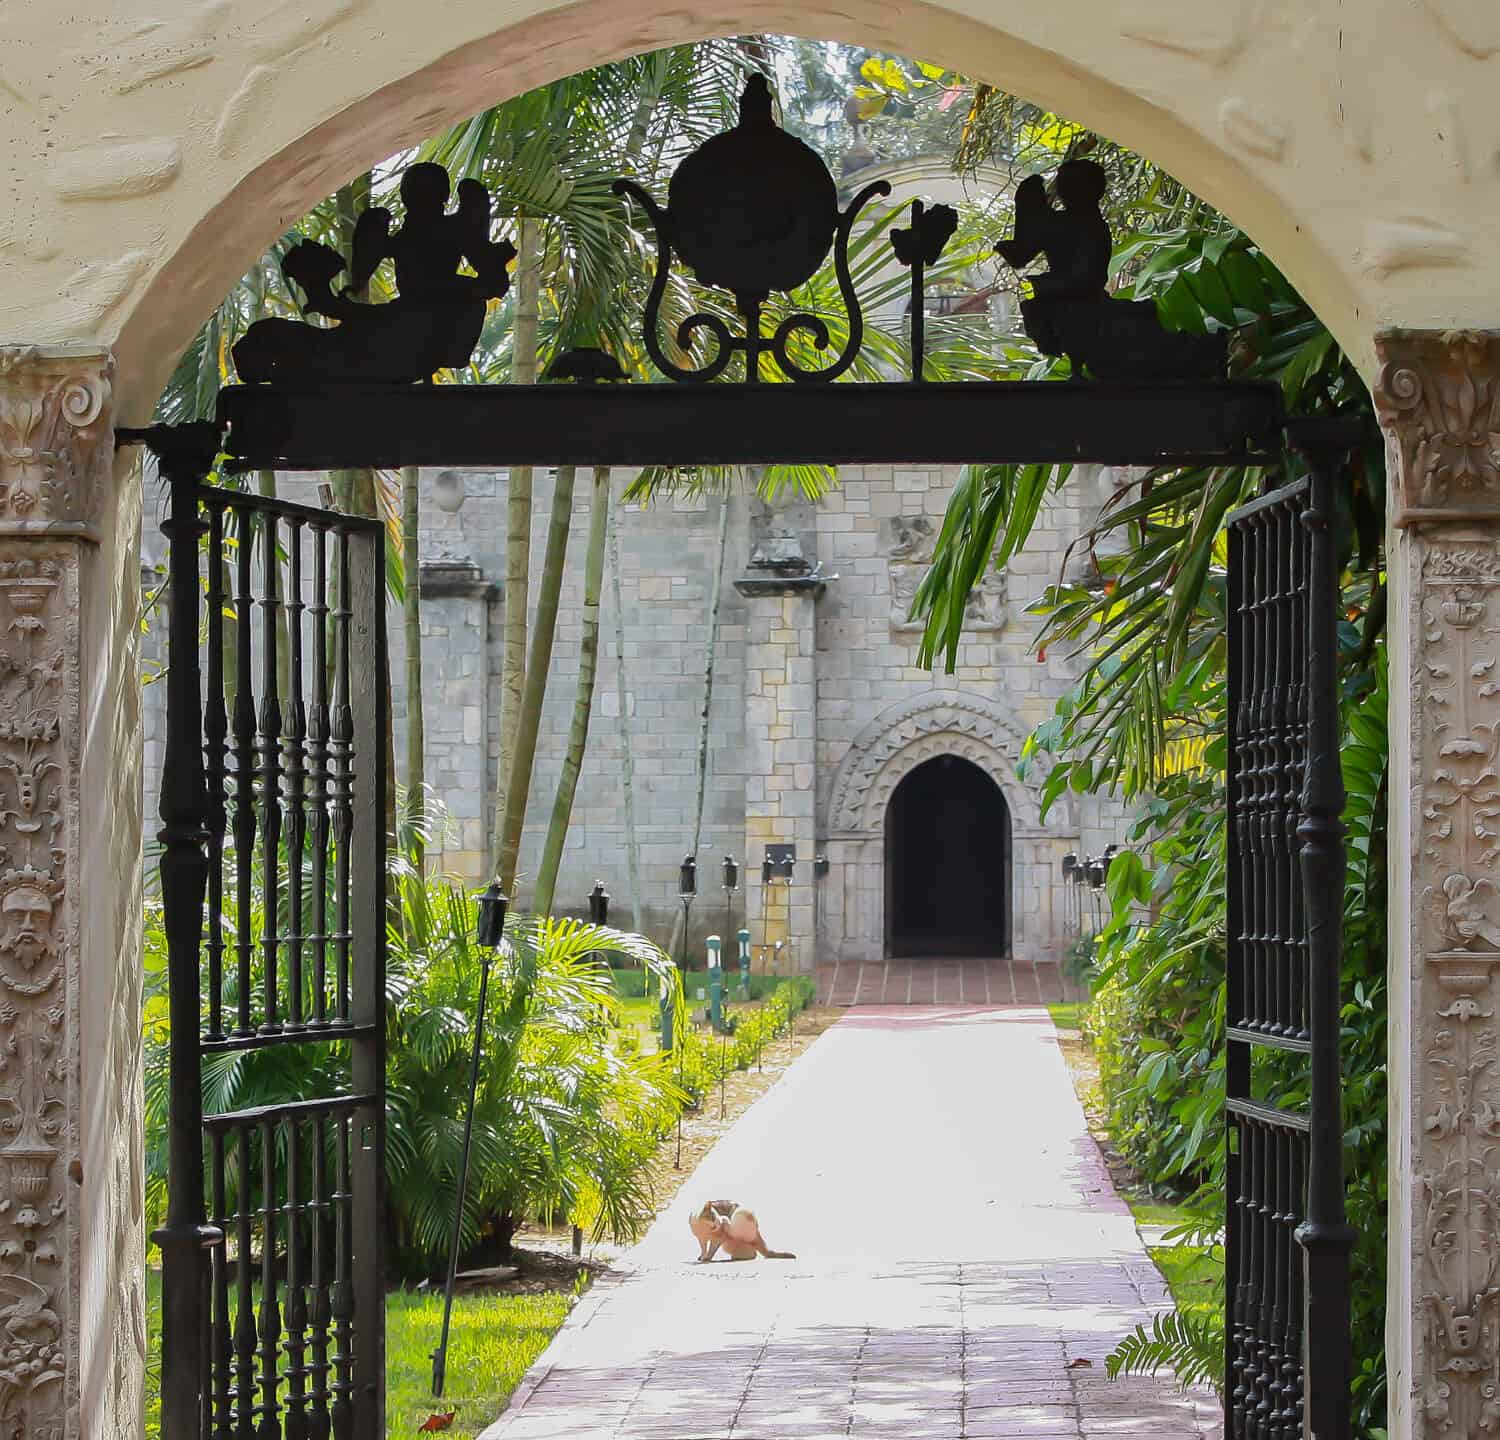 A cat relaxing in the sunshine in side of a gate at St. Bernard de Clairvaux Church in Florida.